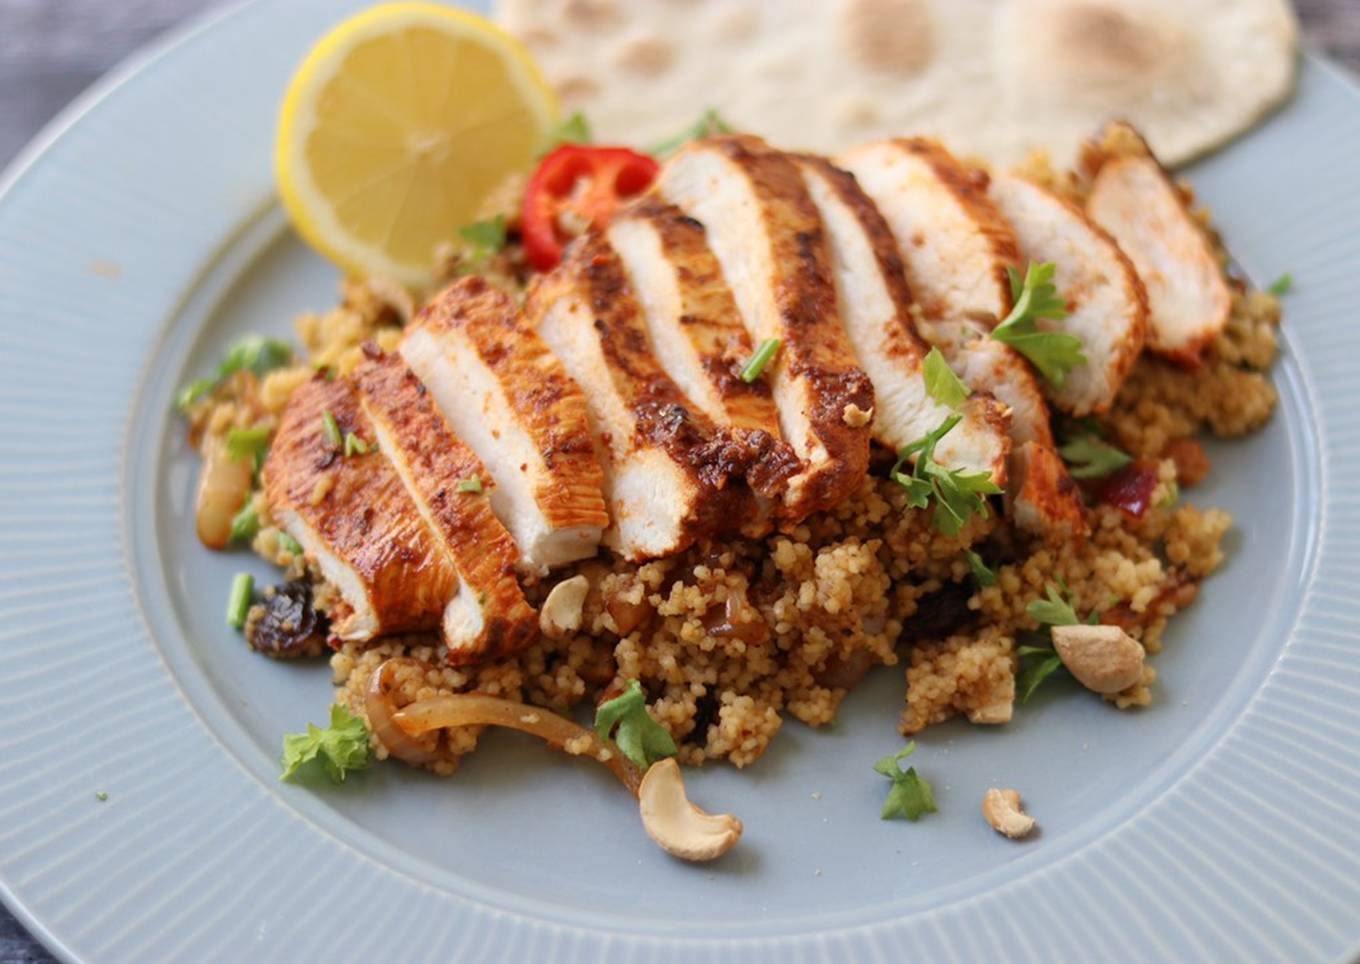 Harissa chicken with couscous and flatbread